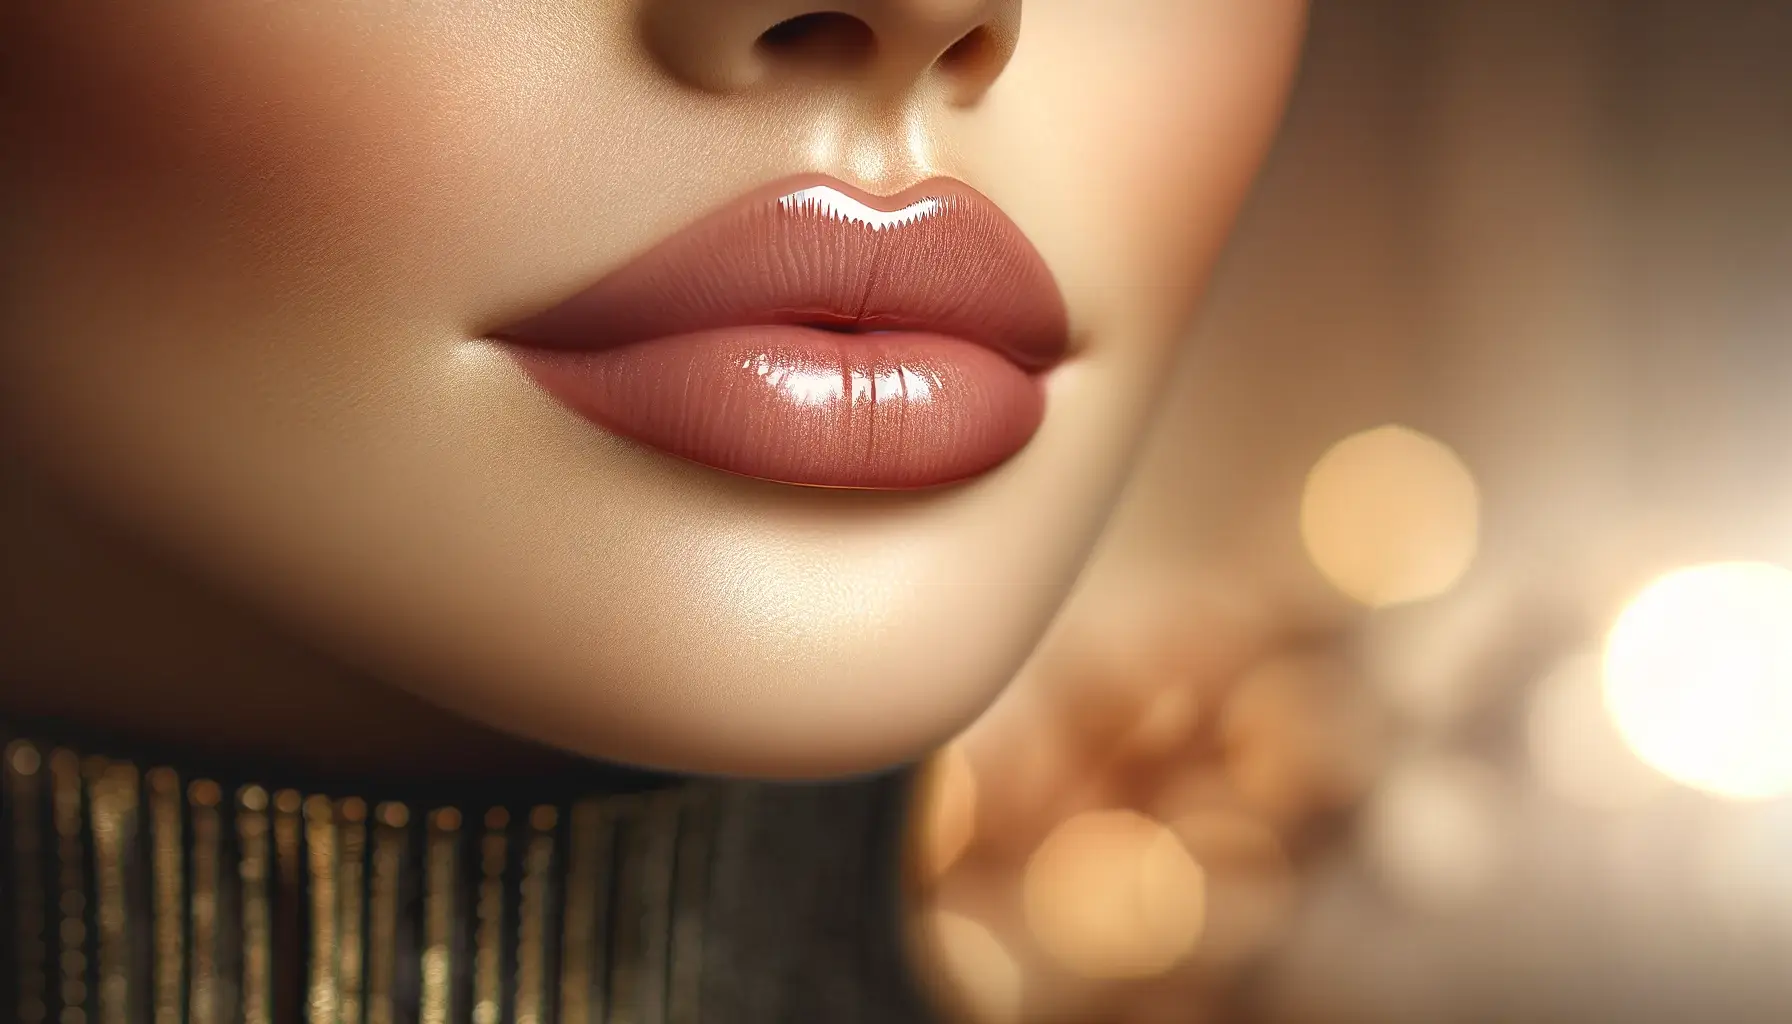 Lip Blushing Cosmetic Tattoo : What Is It And Is It Safe?